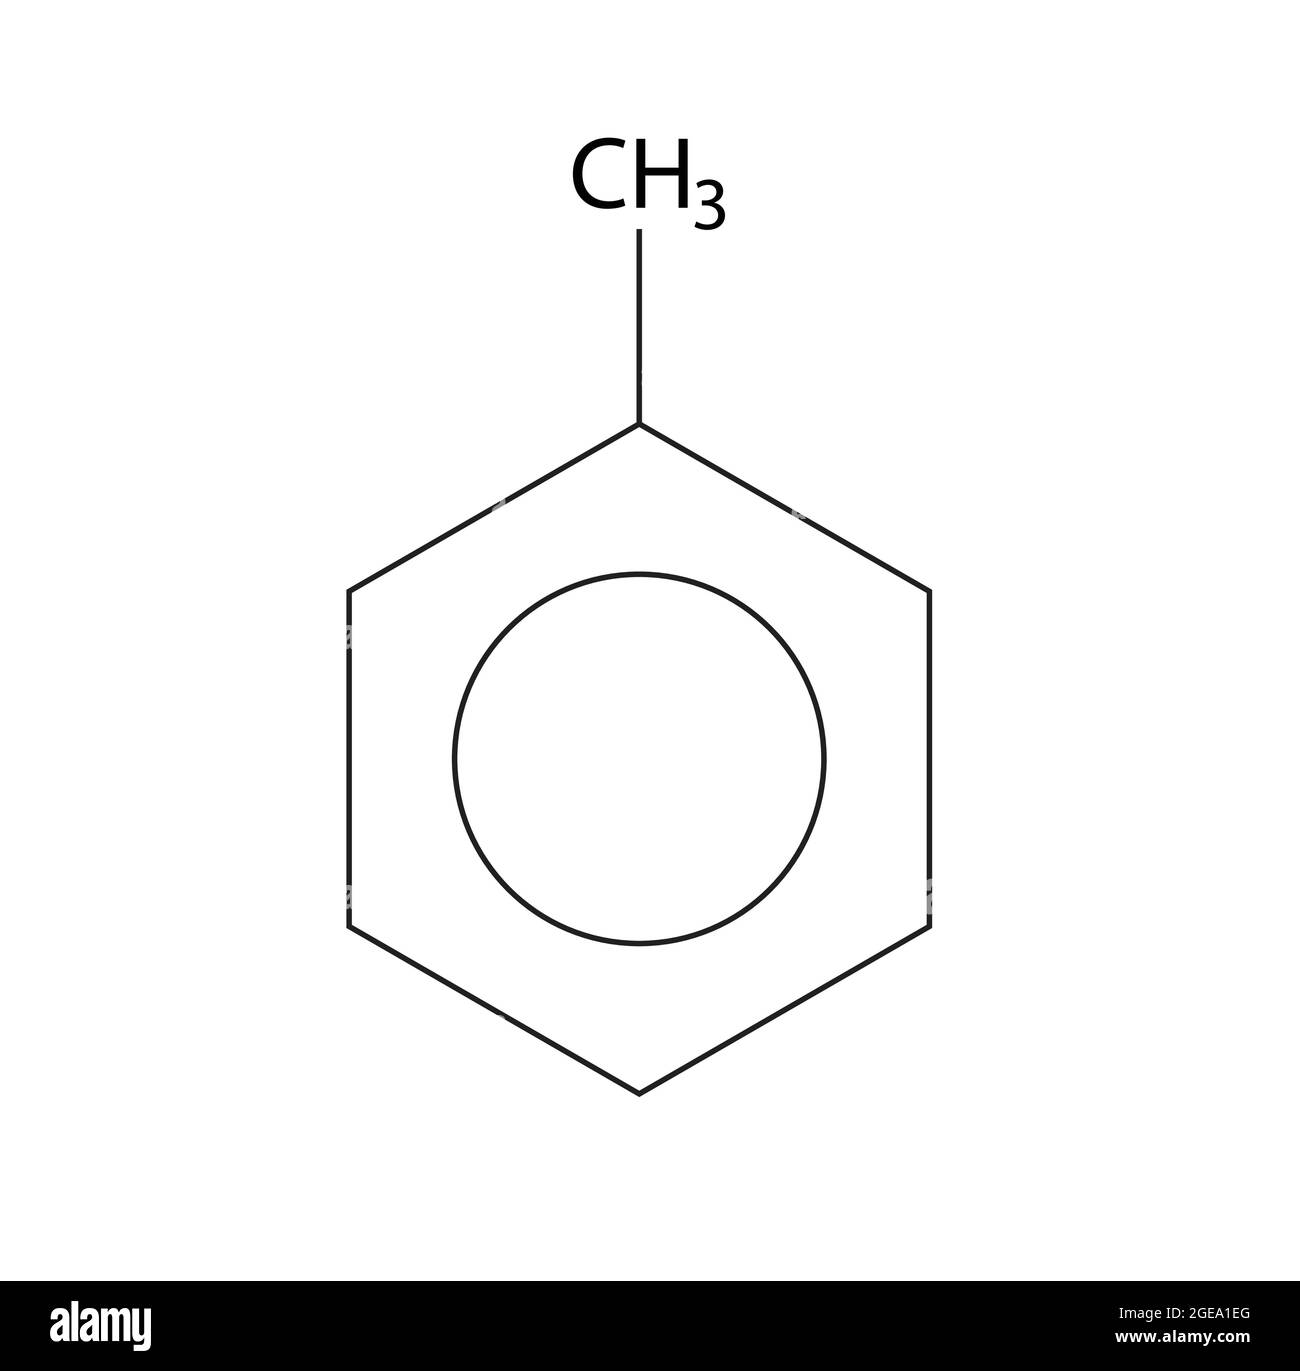 Chemical Structure of Toluene, Anatomy Of Toluene, Molecular structure of Toluene, Chemical formula of toluene, Toluene Configure, Toluene structure Stock Vector